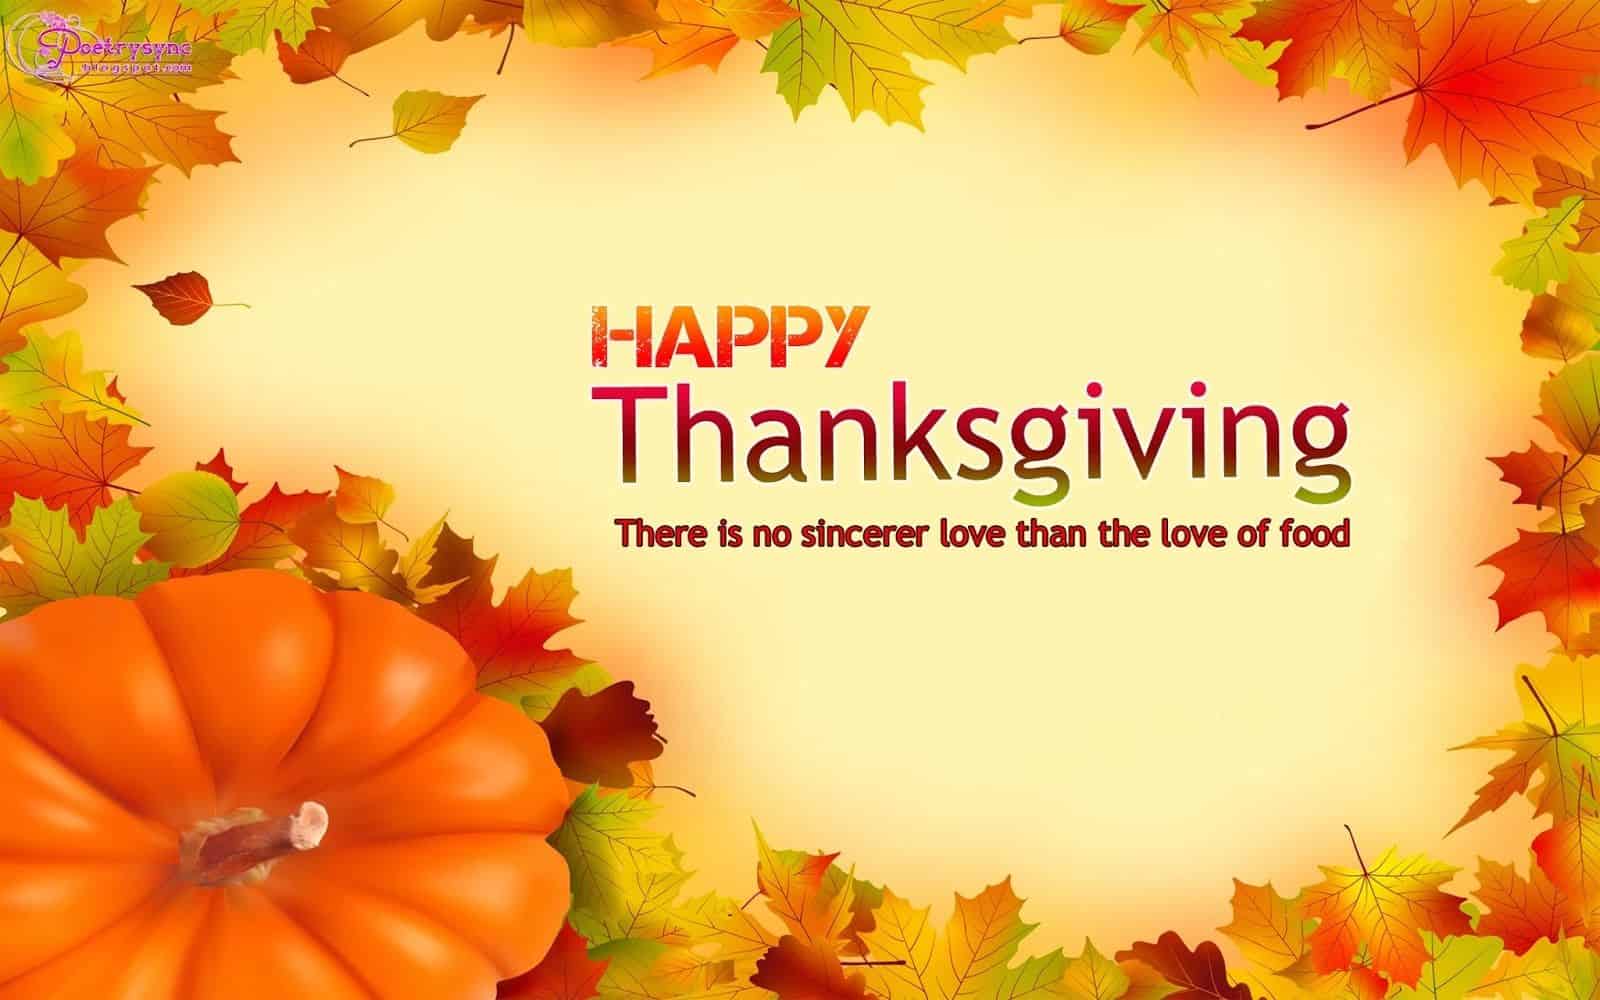 Religious Thanksgiving Wishes and Messages